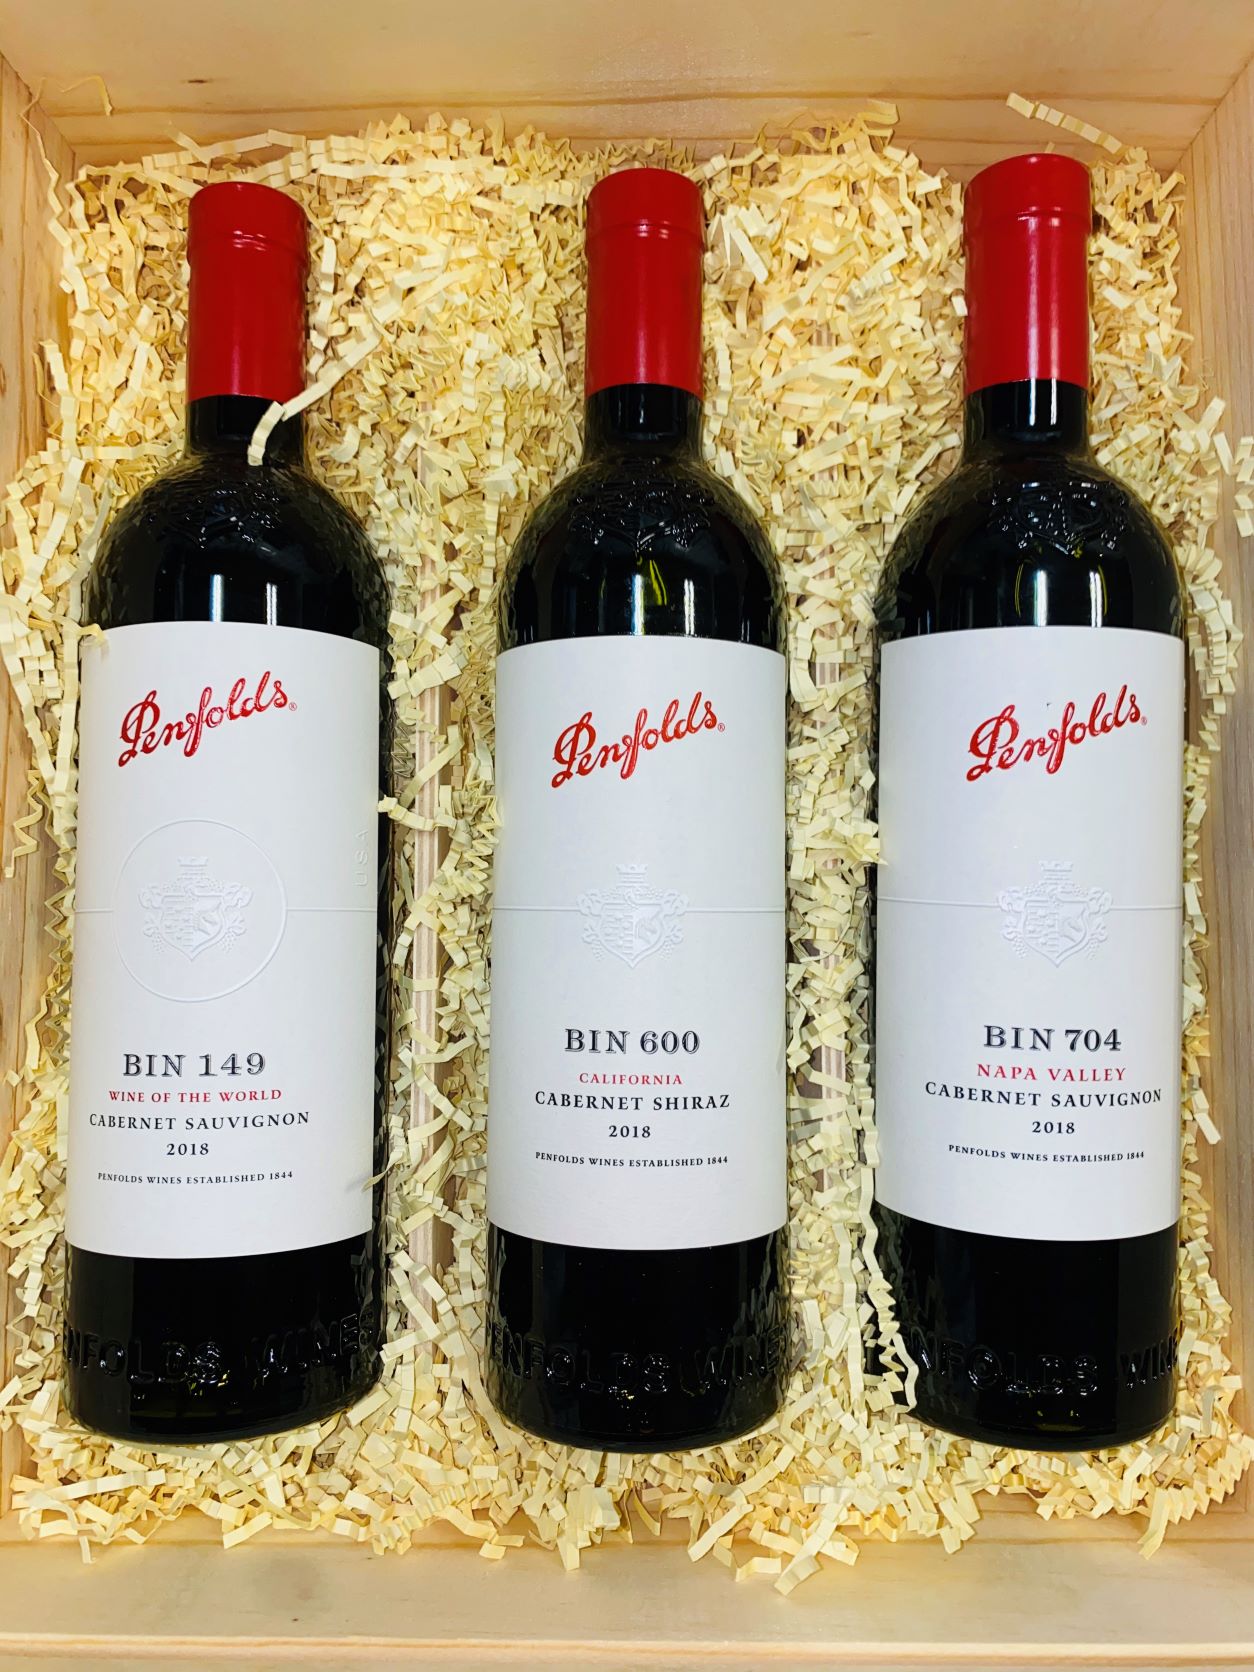 Penfolds New California Collaboration Three Pack #21C8 - click image for full description